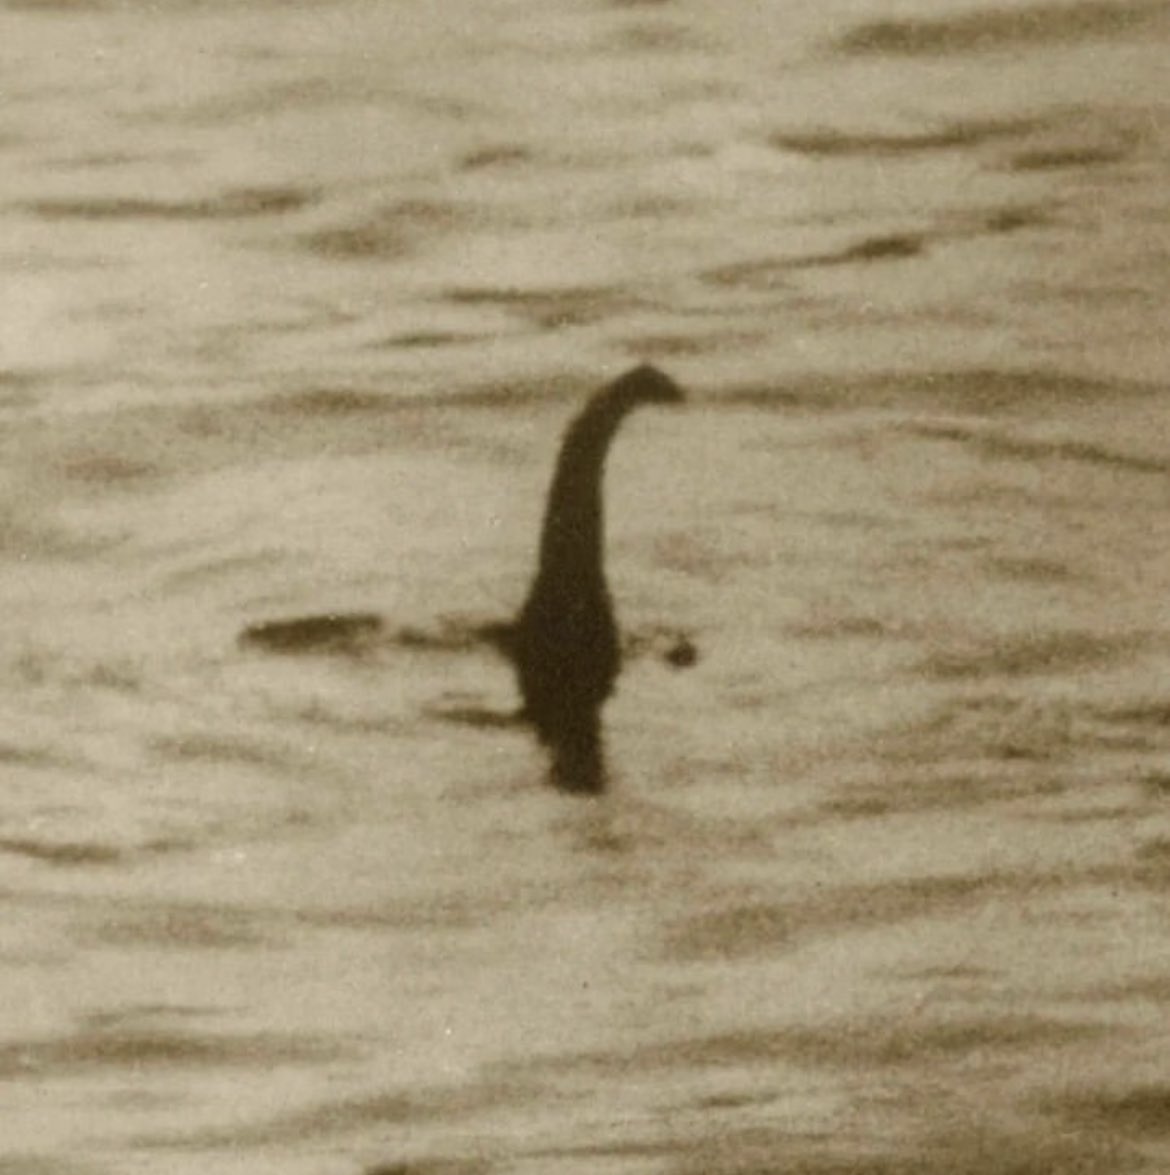 The legend of the Loch Ness Monster dates back to ancient times, with the first written account claiming that the creature brutally attacked swimmers in Loch Ness, located in modern-day Scotland, in 565 C.E. It was not until Irish abbot St. Columba ordered the animal to leave…